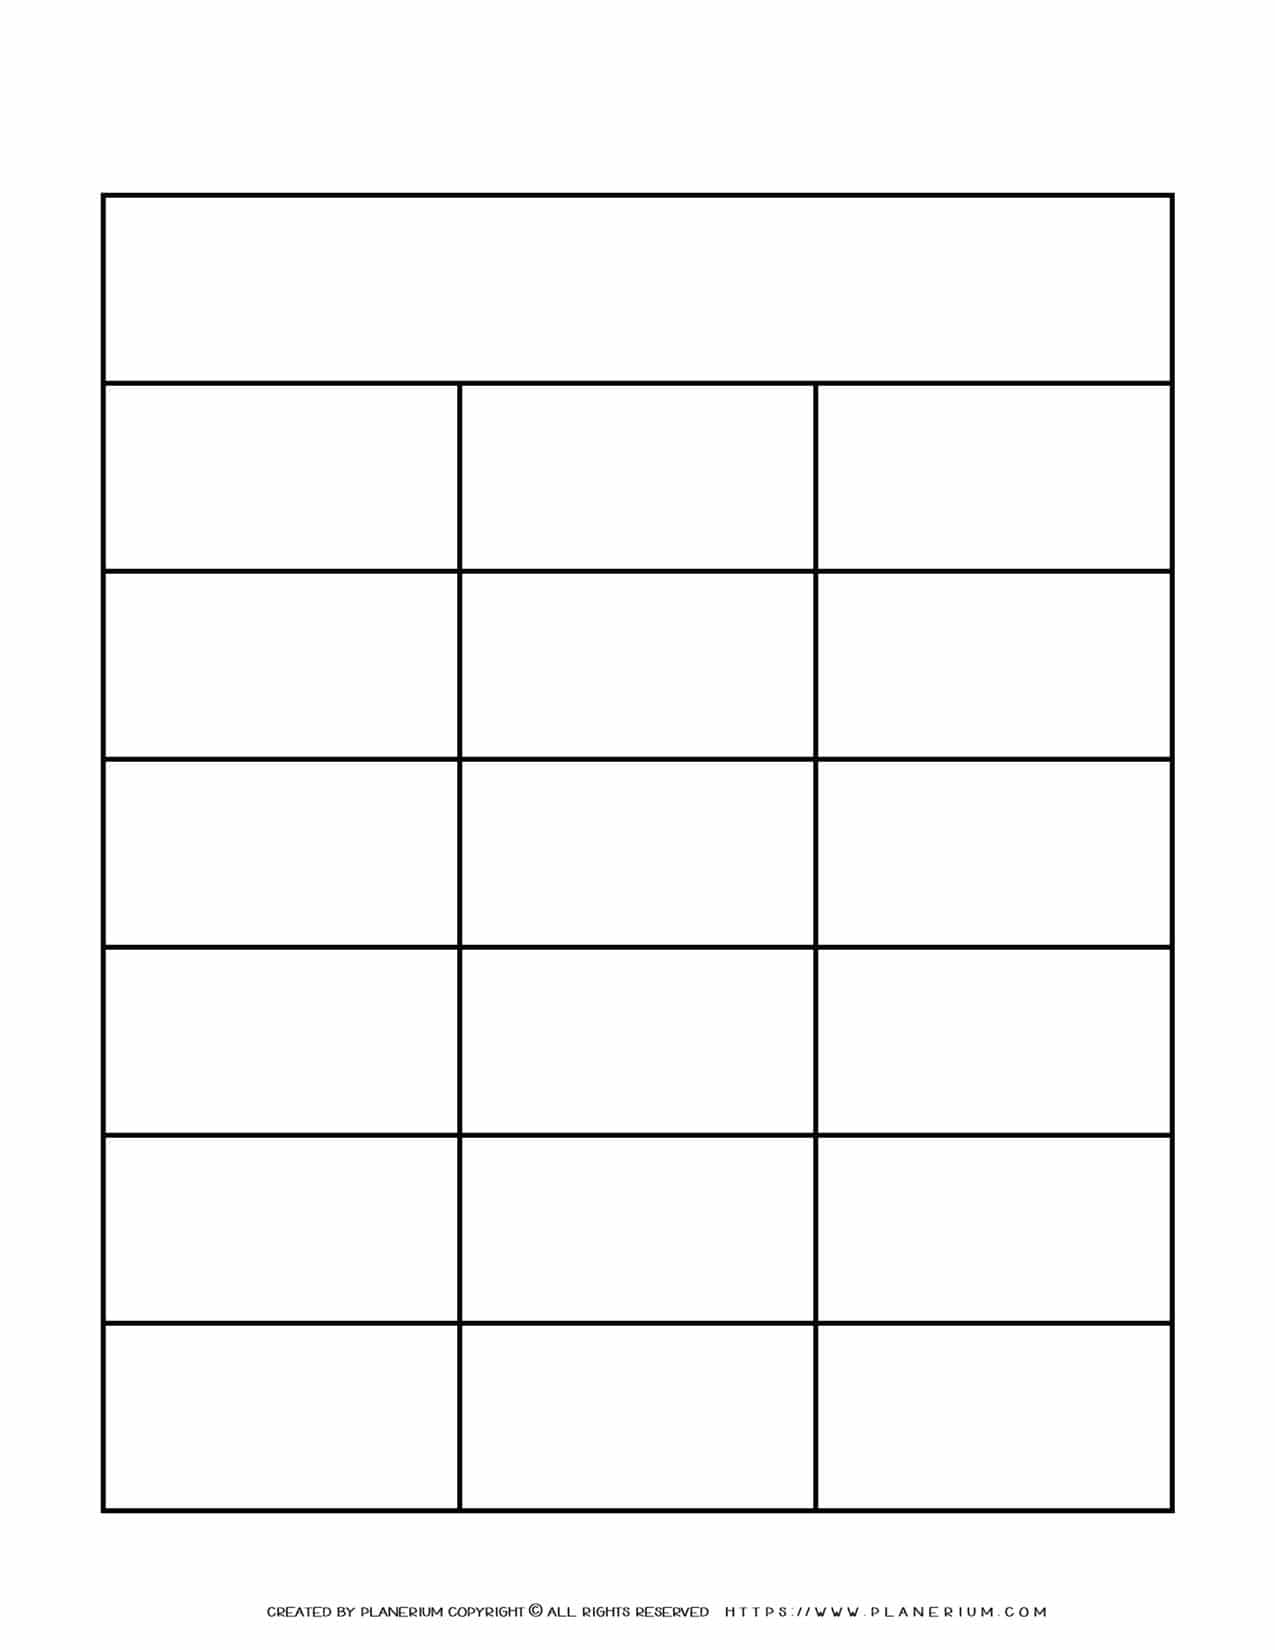 Graphic Organizer Templates - Chart with Three Columns and Six Rows | Planerium